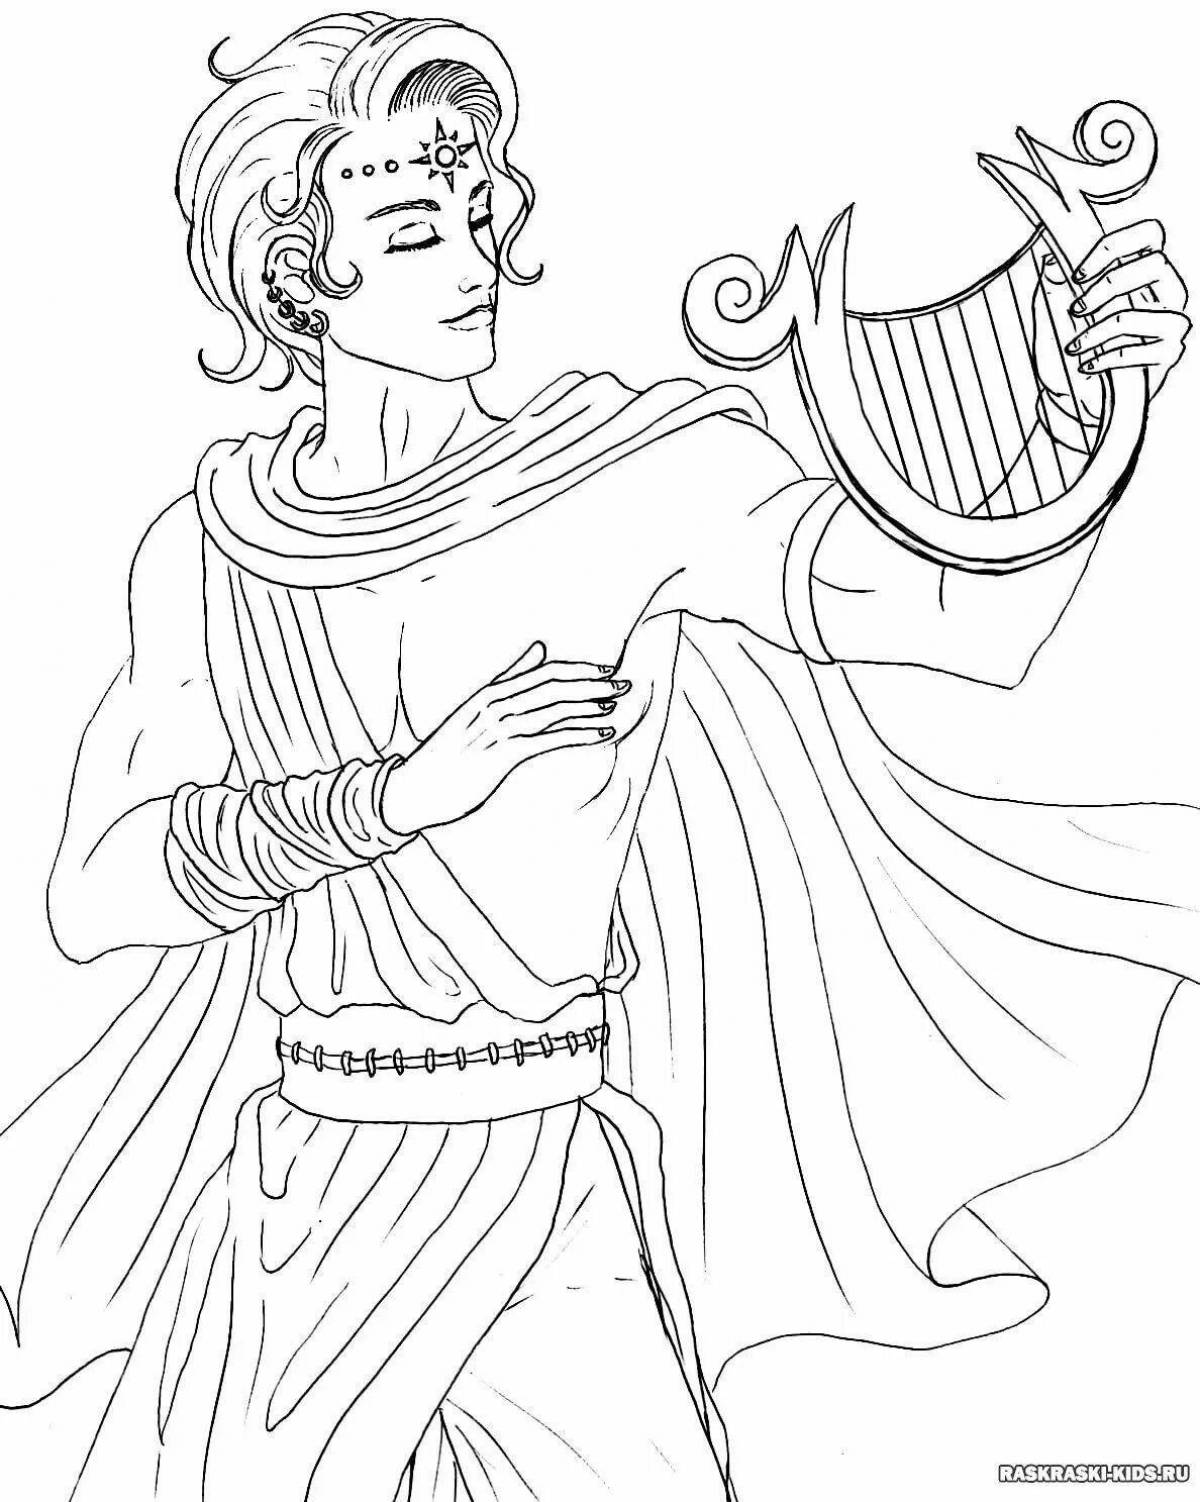 Coloring pages of orpheus and eurydice